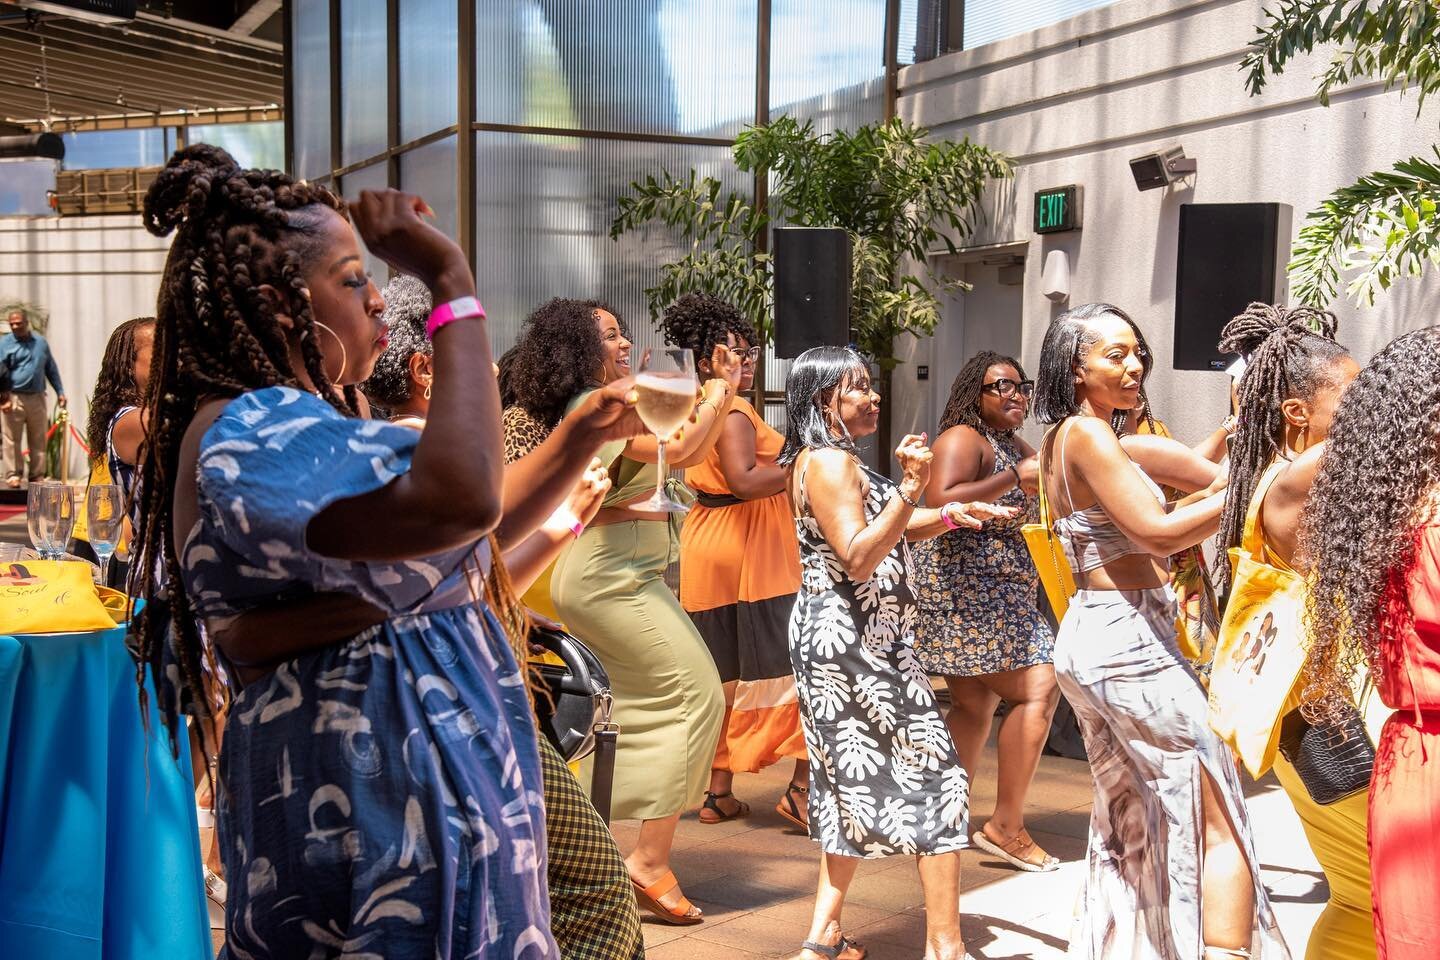 Good morning! We hope you enjoyed your weekend. 🥰

Dancing and having fun is a huge component of @sistahsoulbrunch. It has sort of become tradition to do the electric slide which we enjoy every time! 💃🏾🎵